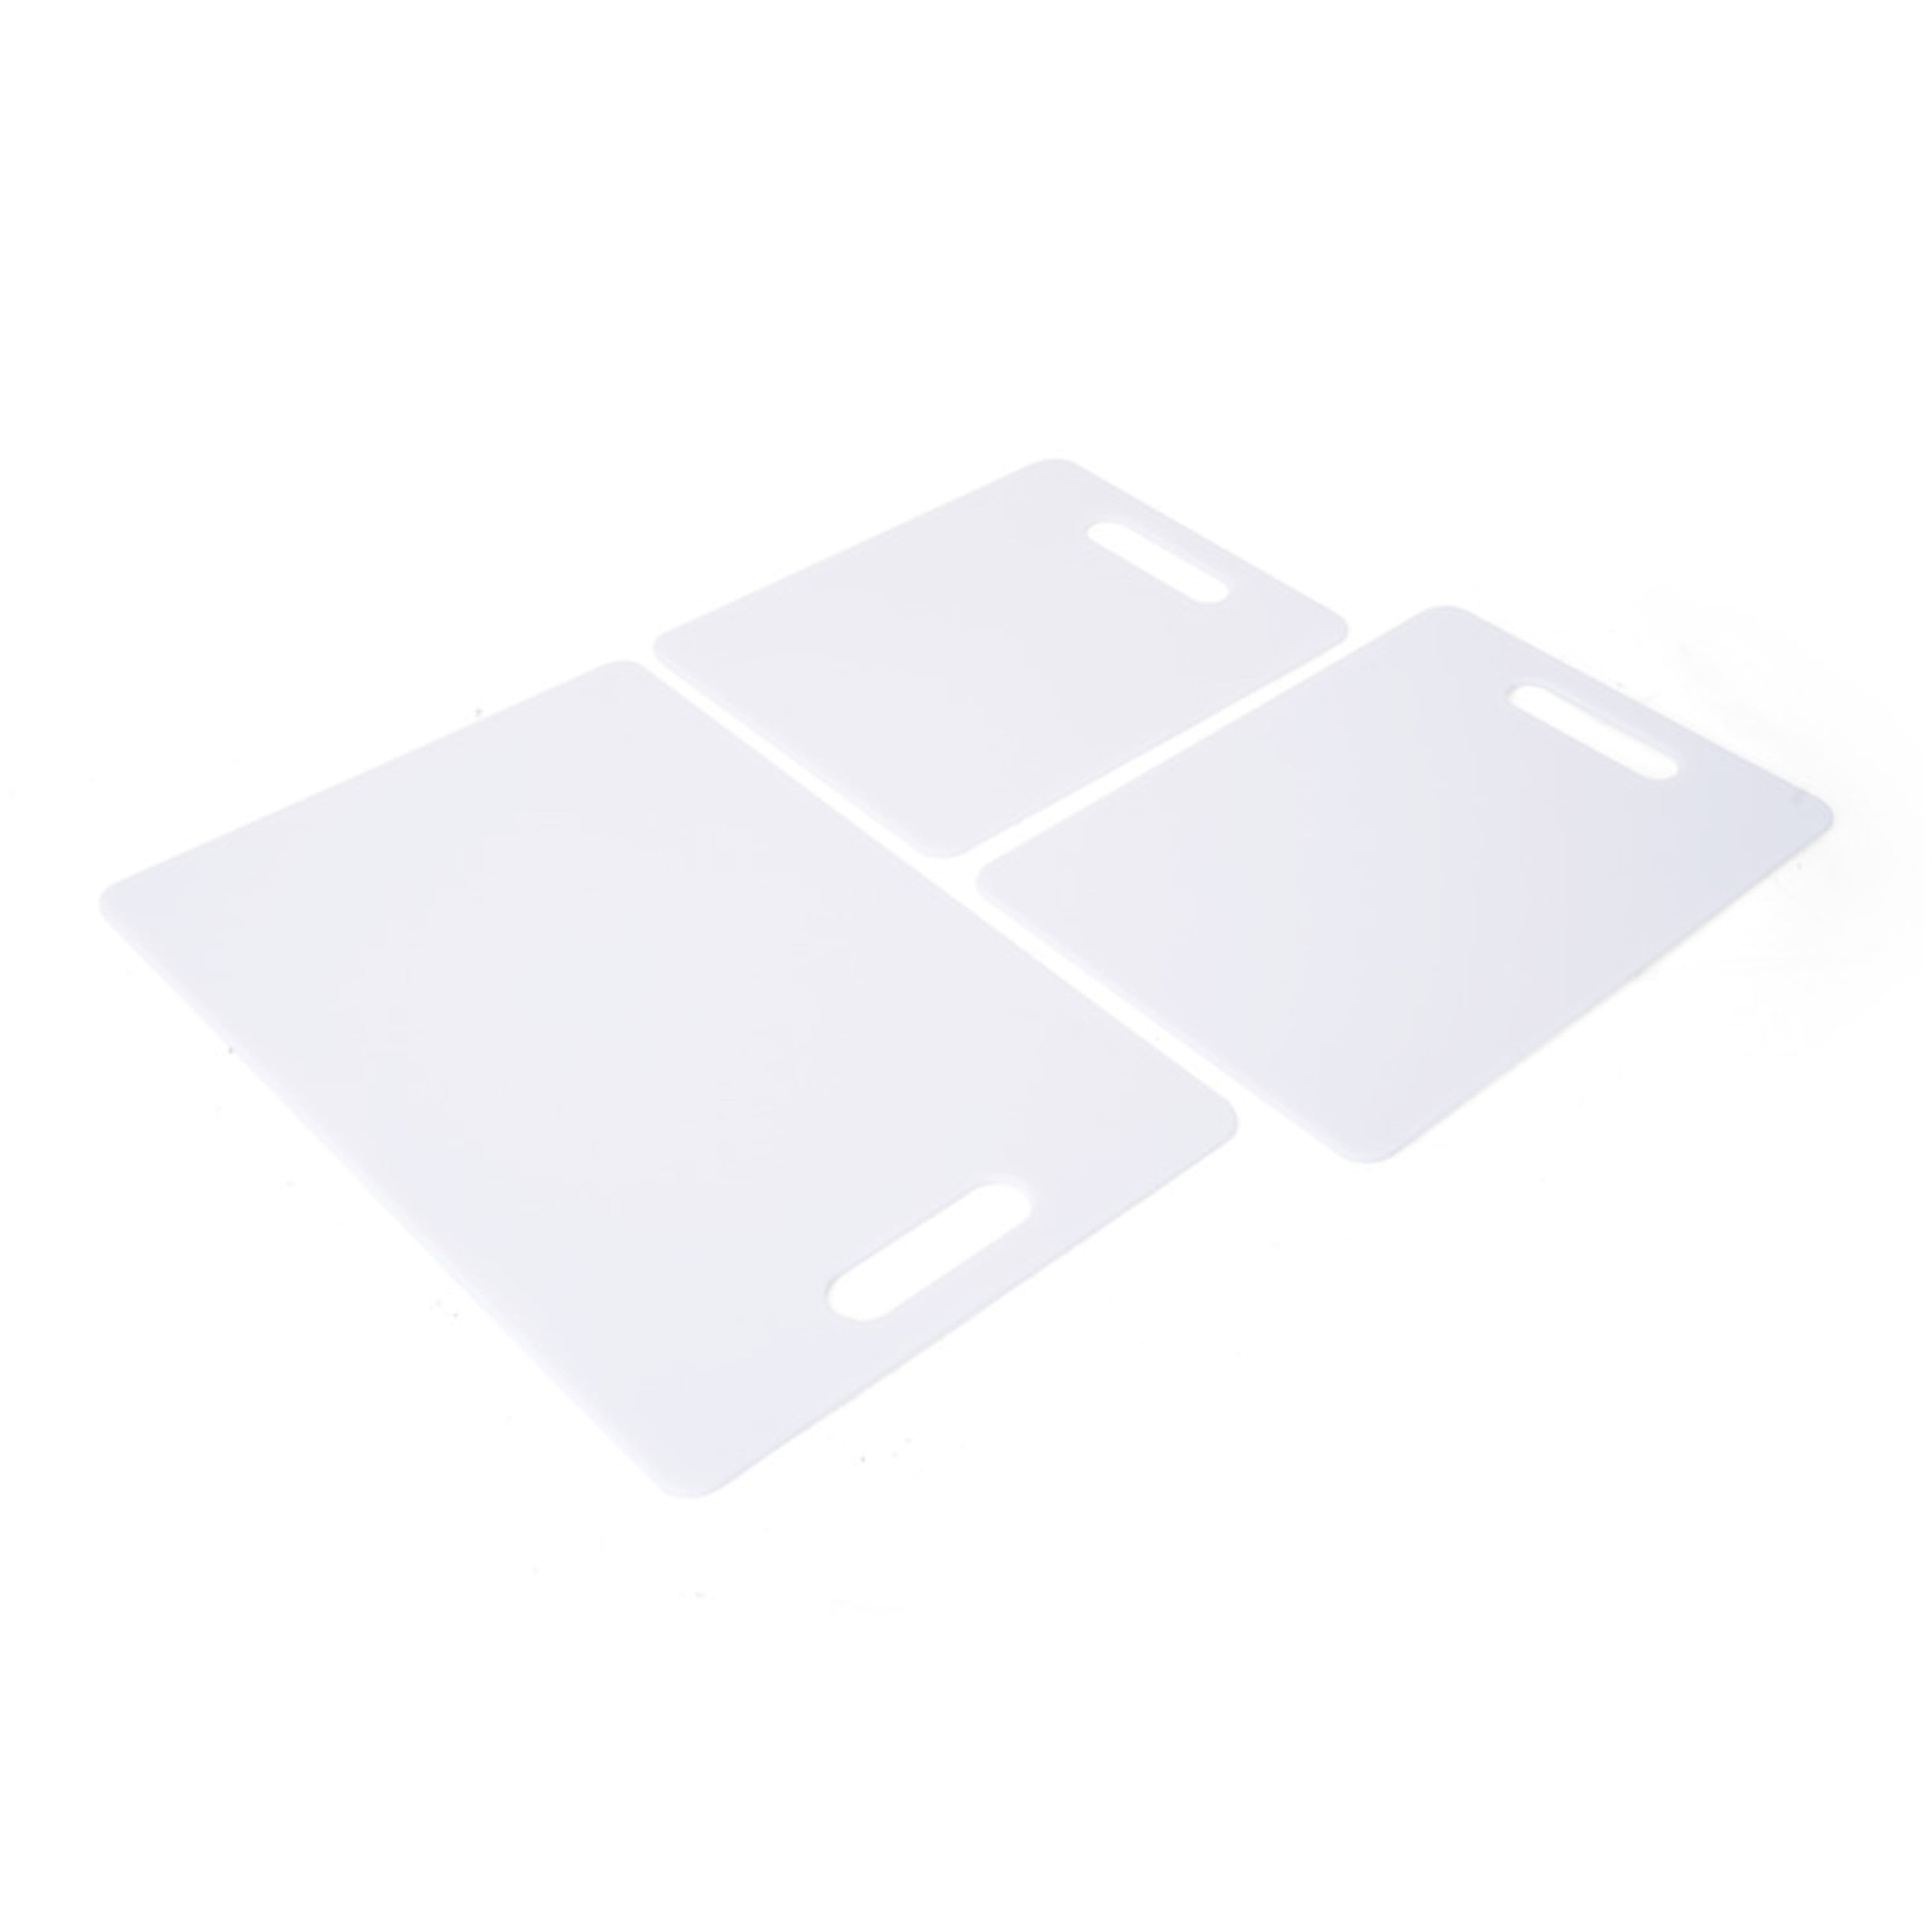 Cutting Boards (Plastic, 3-Piece) by Farberware – The Essential Things